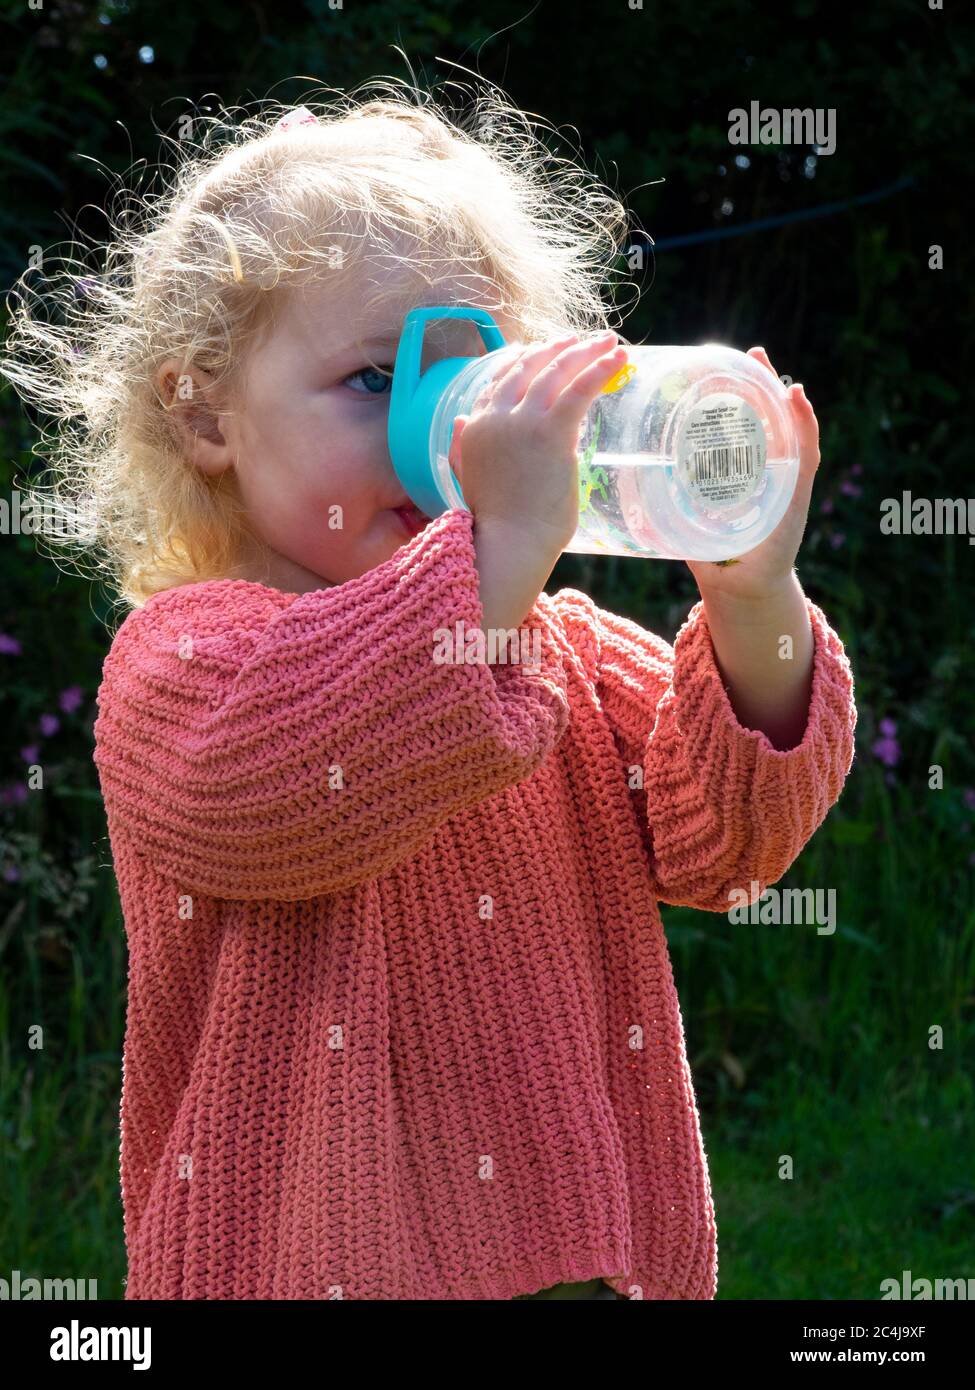 Toddler drinking from a soft straw spout water bottle, UK Stock Photo